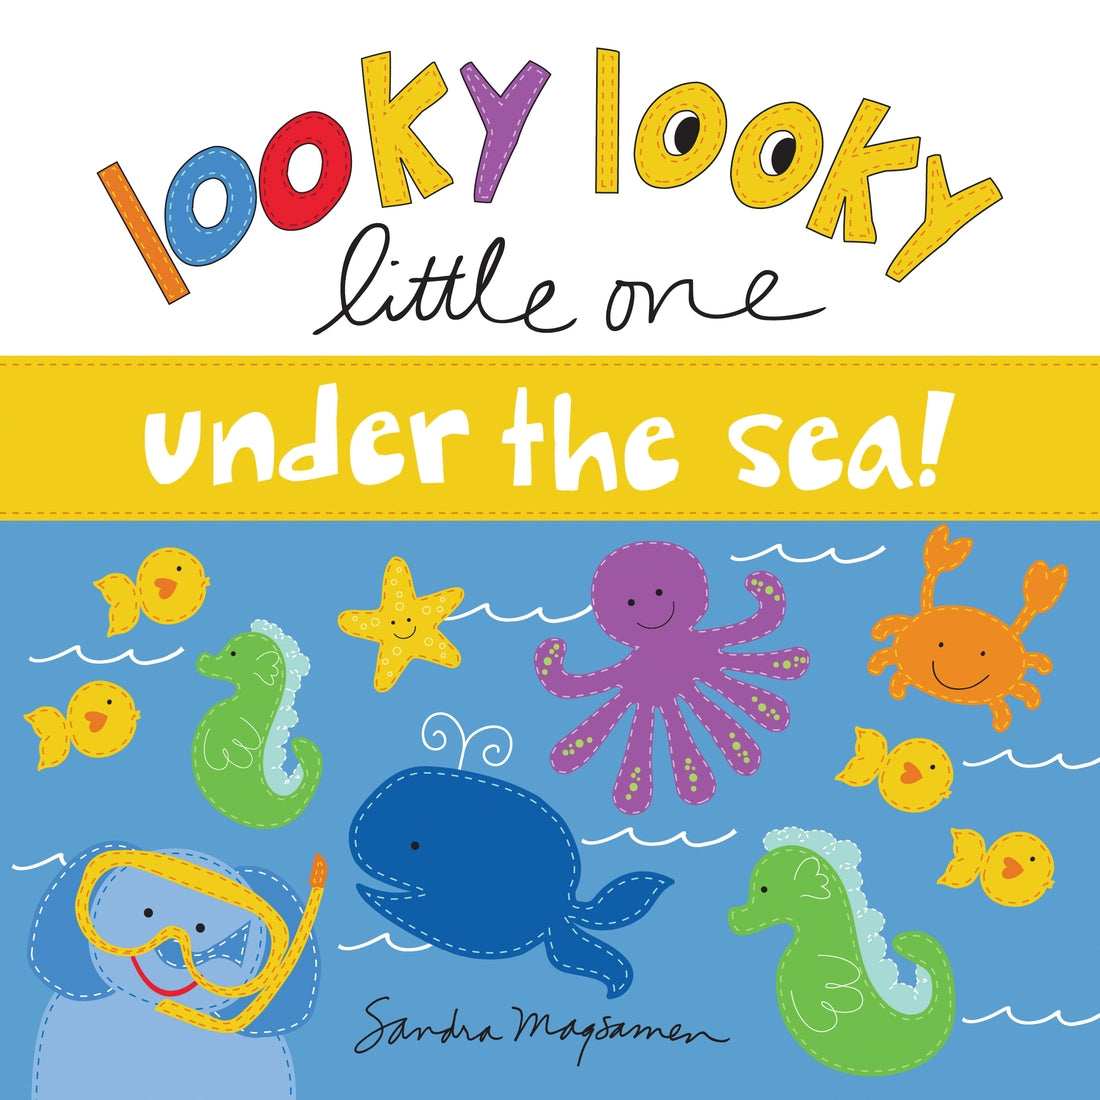 Looky Looky Little One Under the Sea Book  - Doodlebug's Children's Boutique